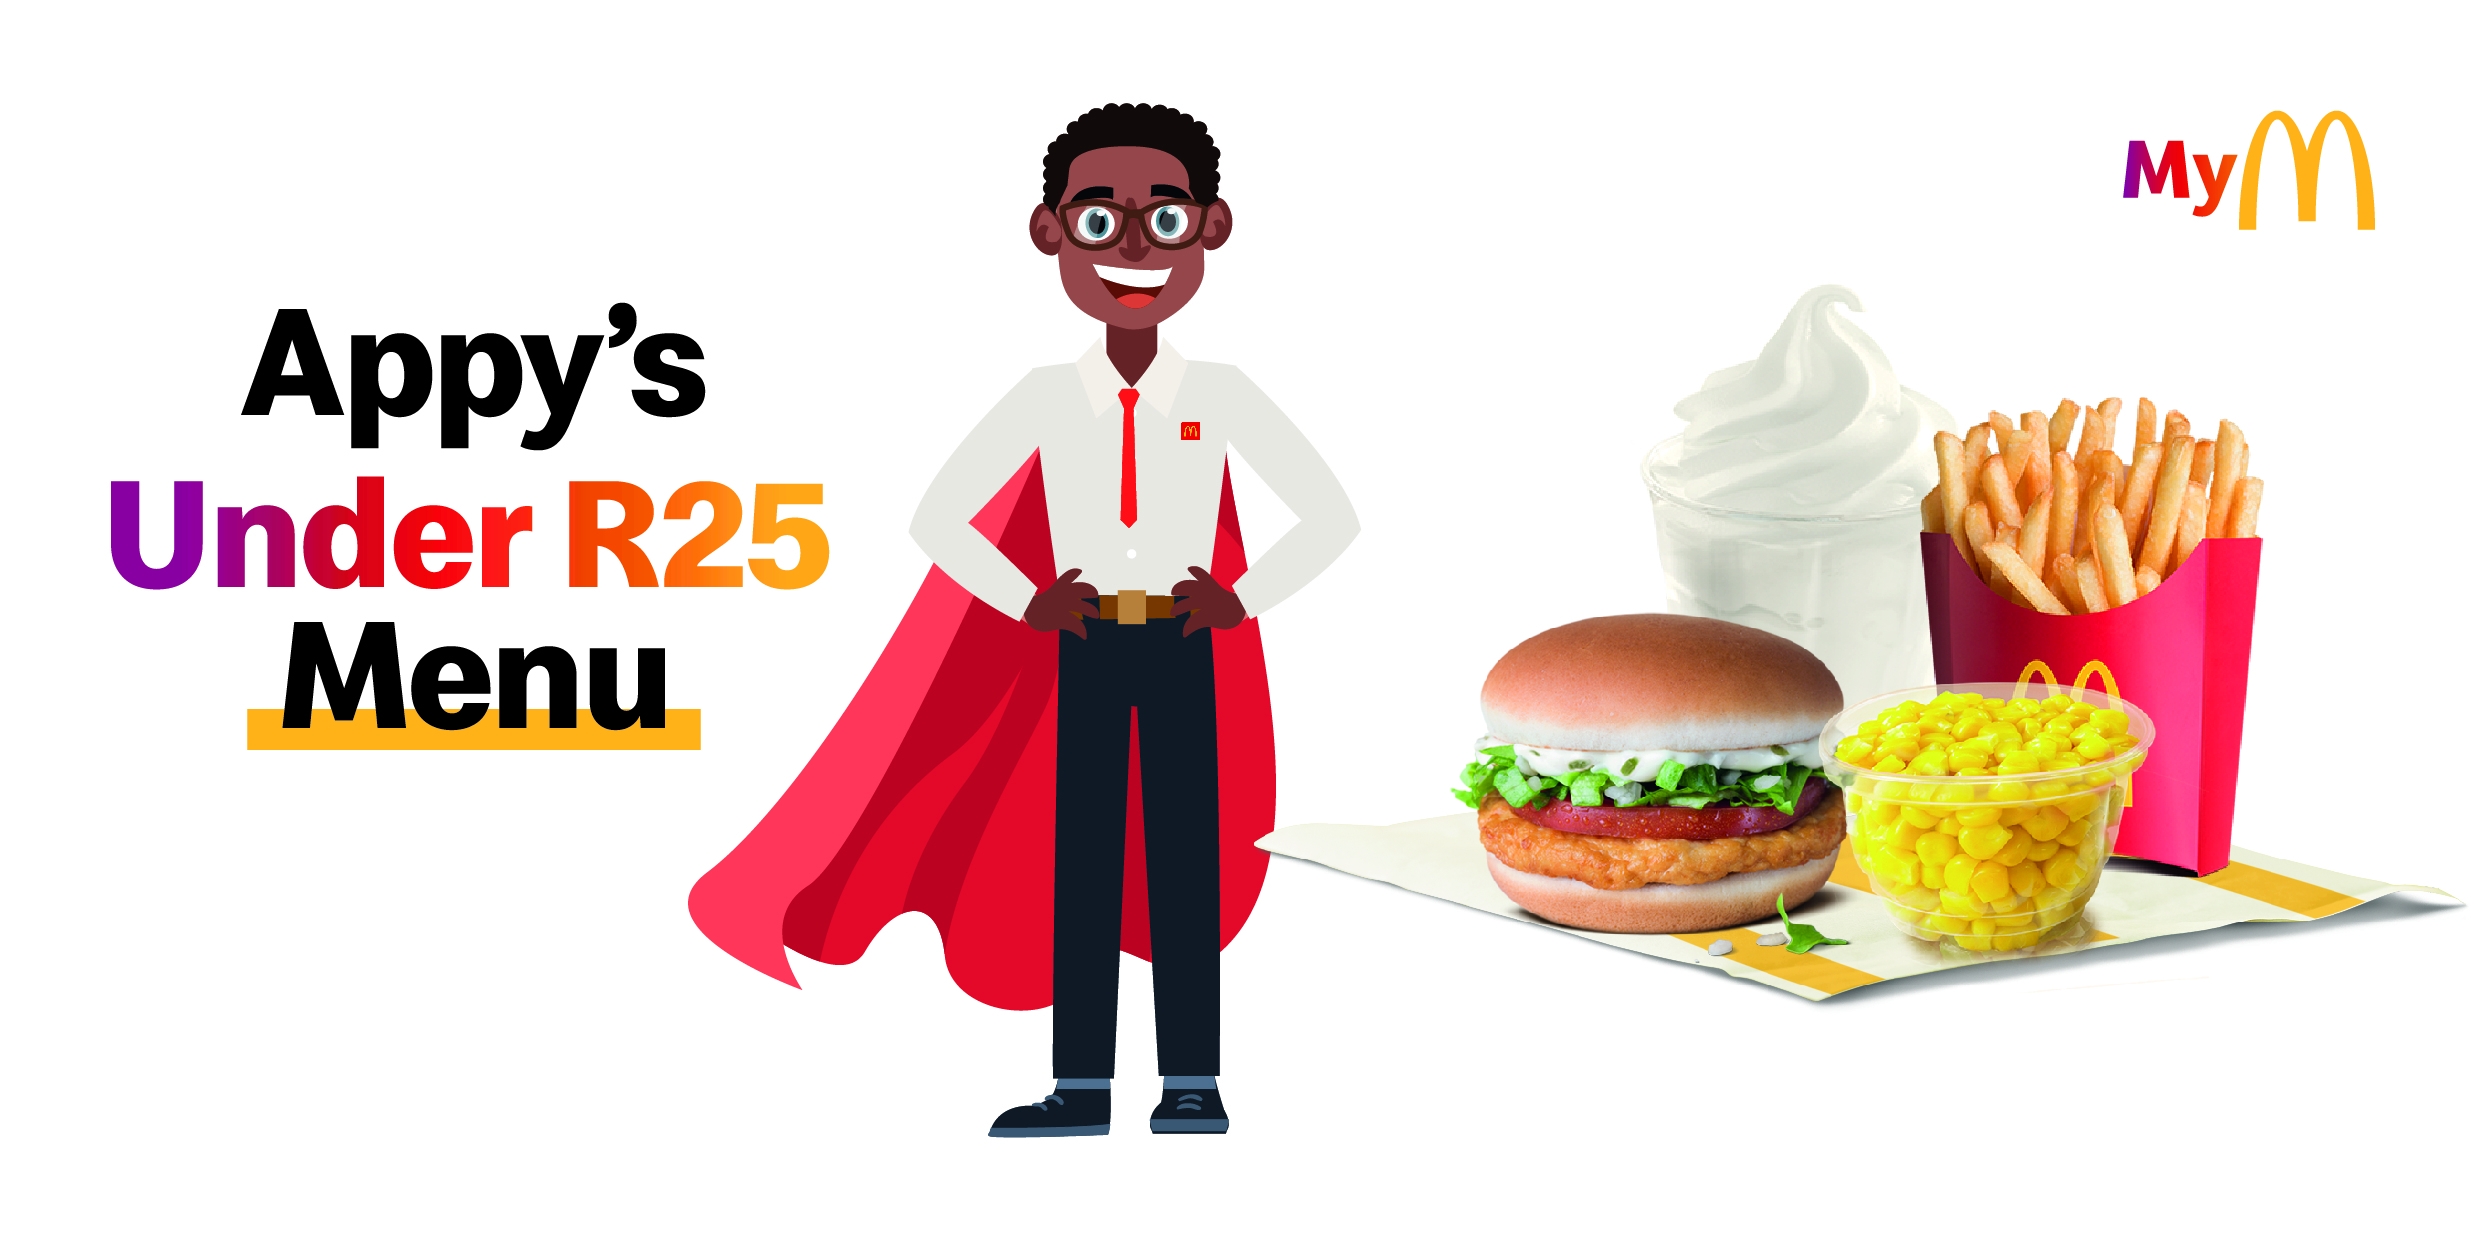 Save on these yummy deals - McDonald's